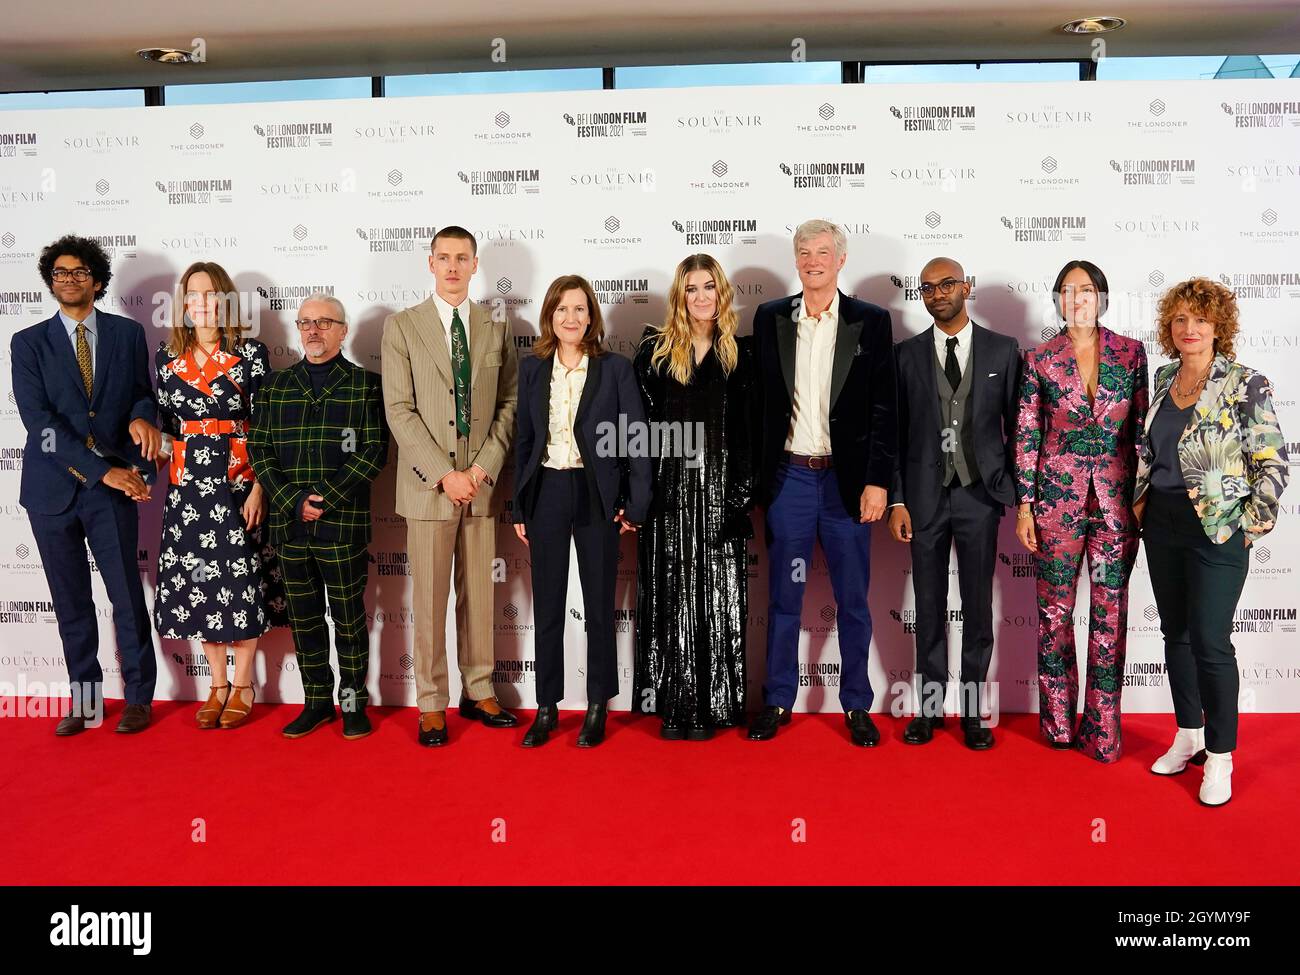 Richard Ayoade, Lydia Fox, Harris Dickinson, Joanna Hogg, Honor Swinton Byrne, Jaygann Ayeh, Gala Botero and Tricia Tuttle arrive for the UK premiere of The Souvenir: Part II, at the Royal Festival Hall in London during the BFI London Film Festival. Picture date: Friday October 8, 2021. Stock Photo